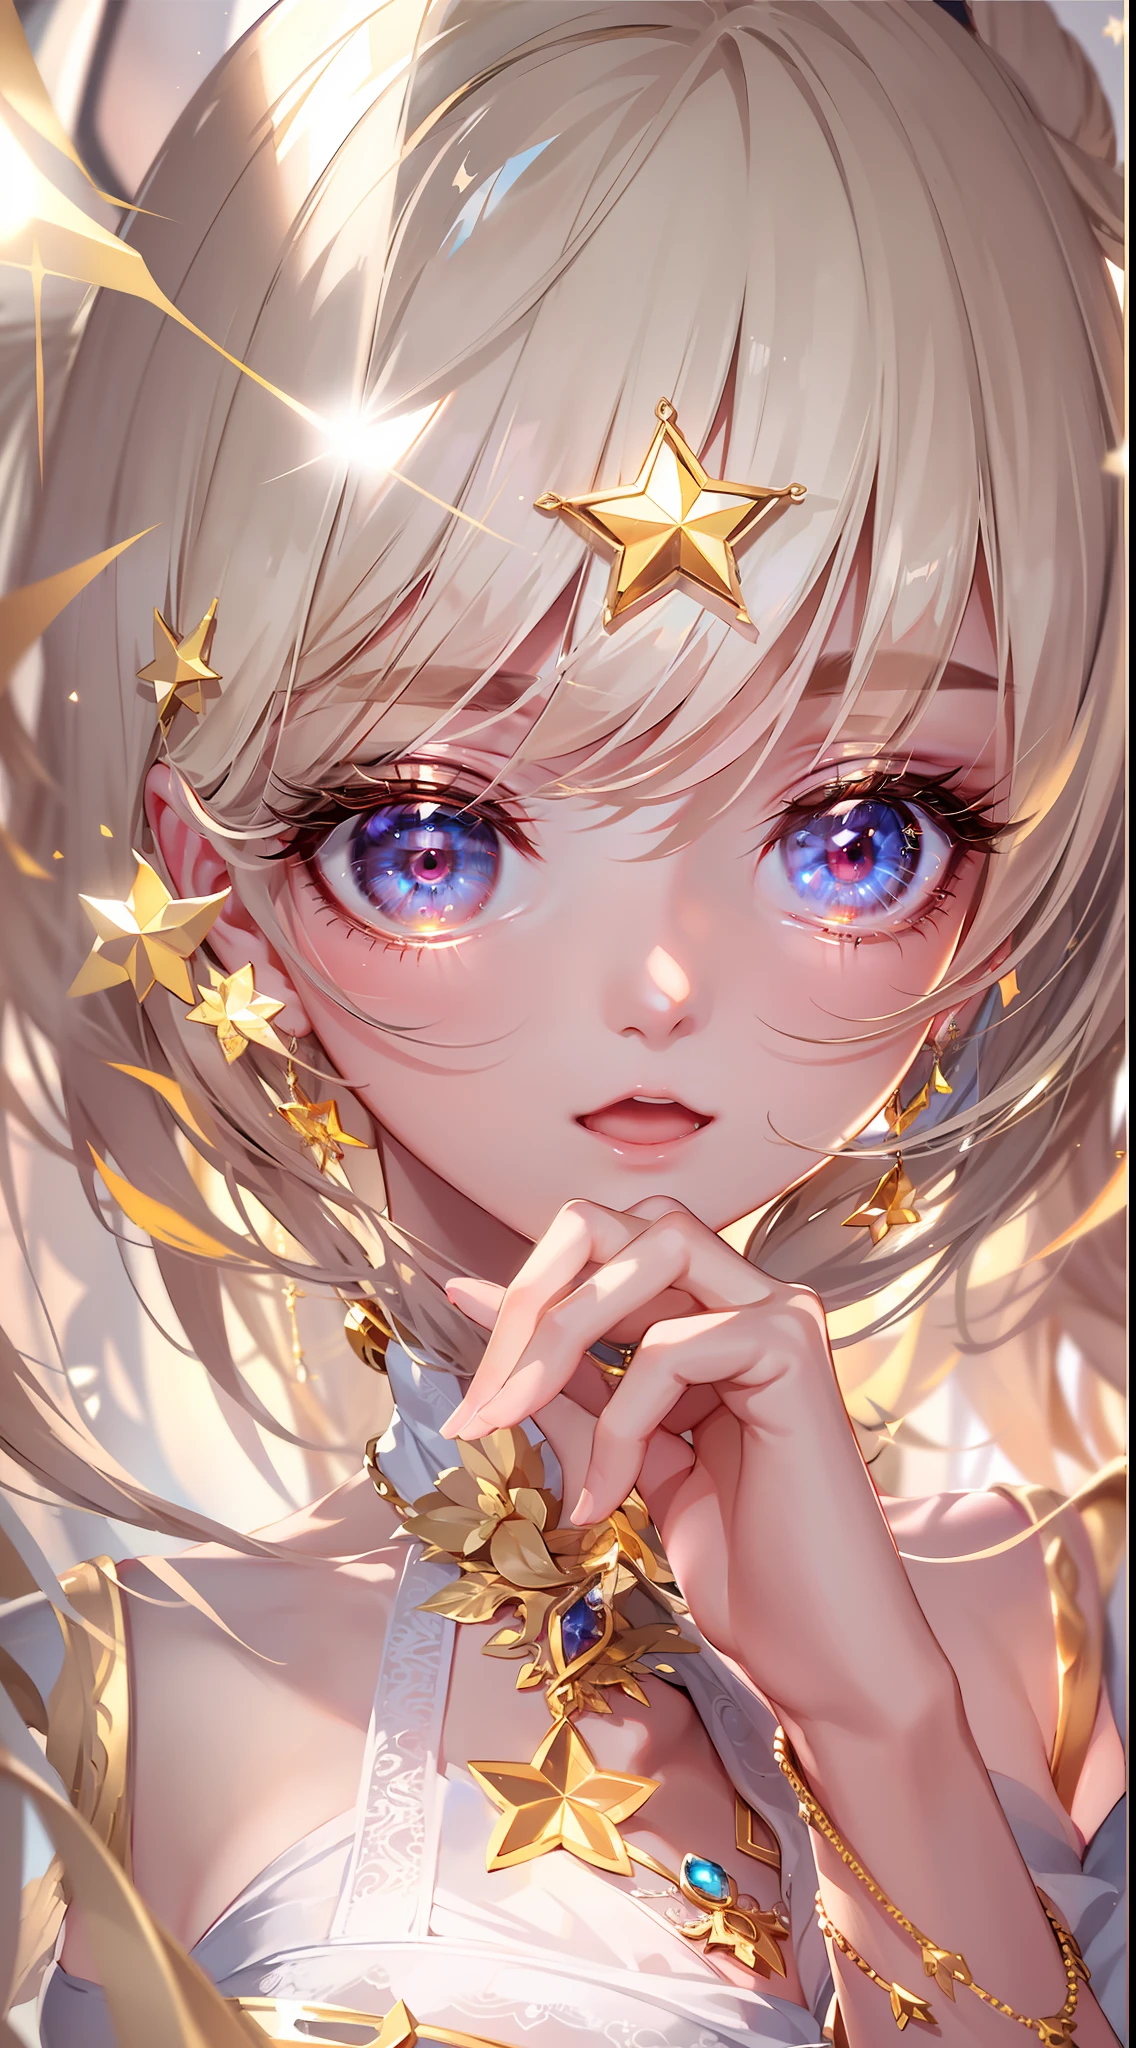 Ultra transparent 8k wallpaper, Brilliant depiction of details, Charming and energetic breeze, Mysterious and seductive angle, Glamorous and glamorous gold-rimmed star-shaped eye ornament, Attractive necklace jewelry, Mesmerizing eye detail, Perfectly presented big eyeodel standing，Female pervert